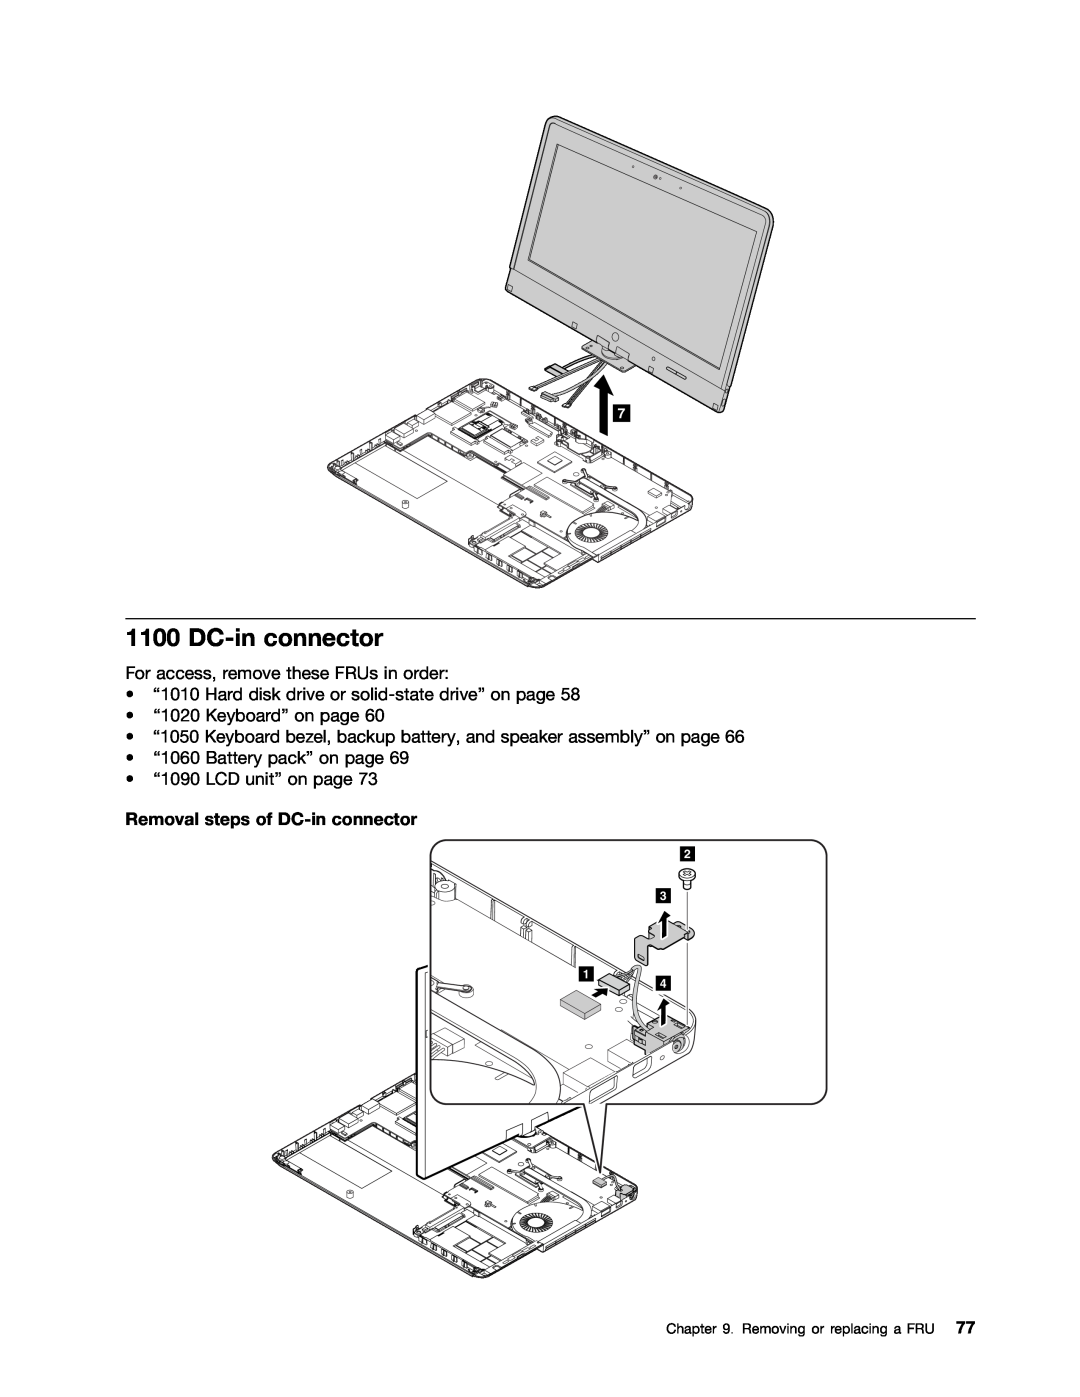 Lenovo 33472YU, S230U manual Removal steps of DC-in connector, Removing or replacing a FRU 